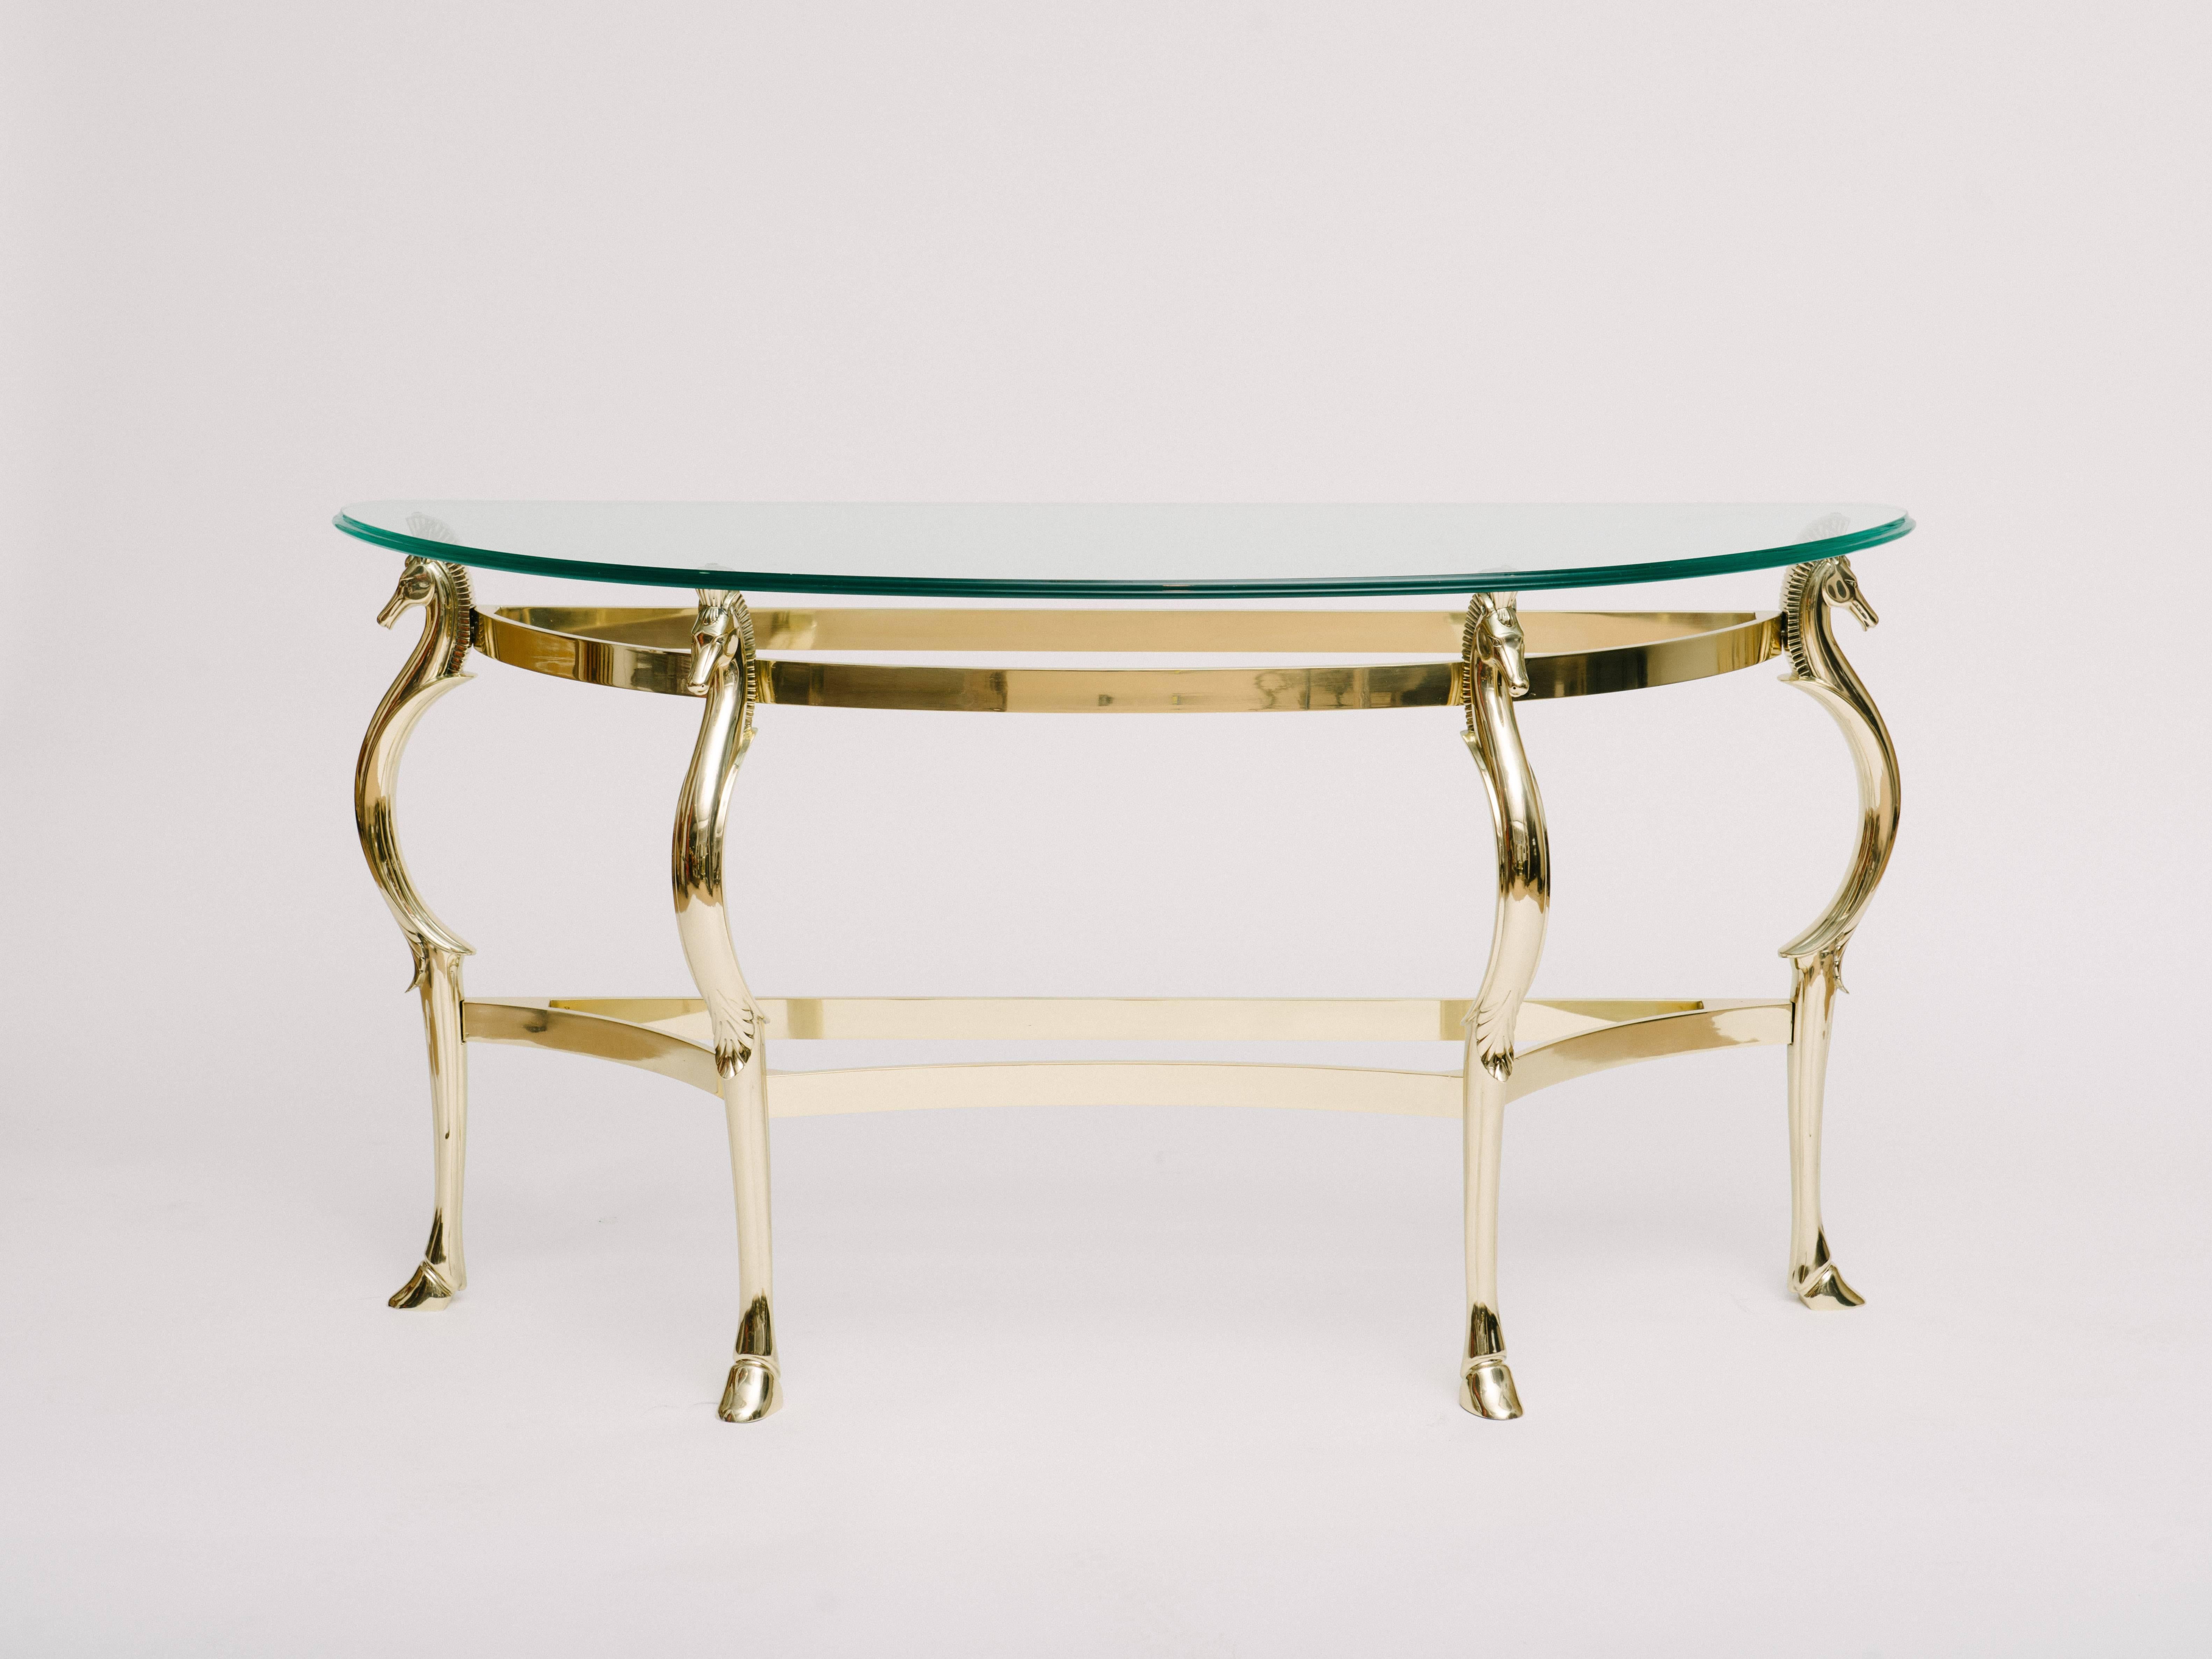 Italian polished brass console demilune console table with glass top.